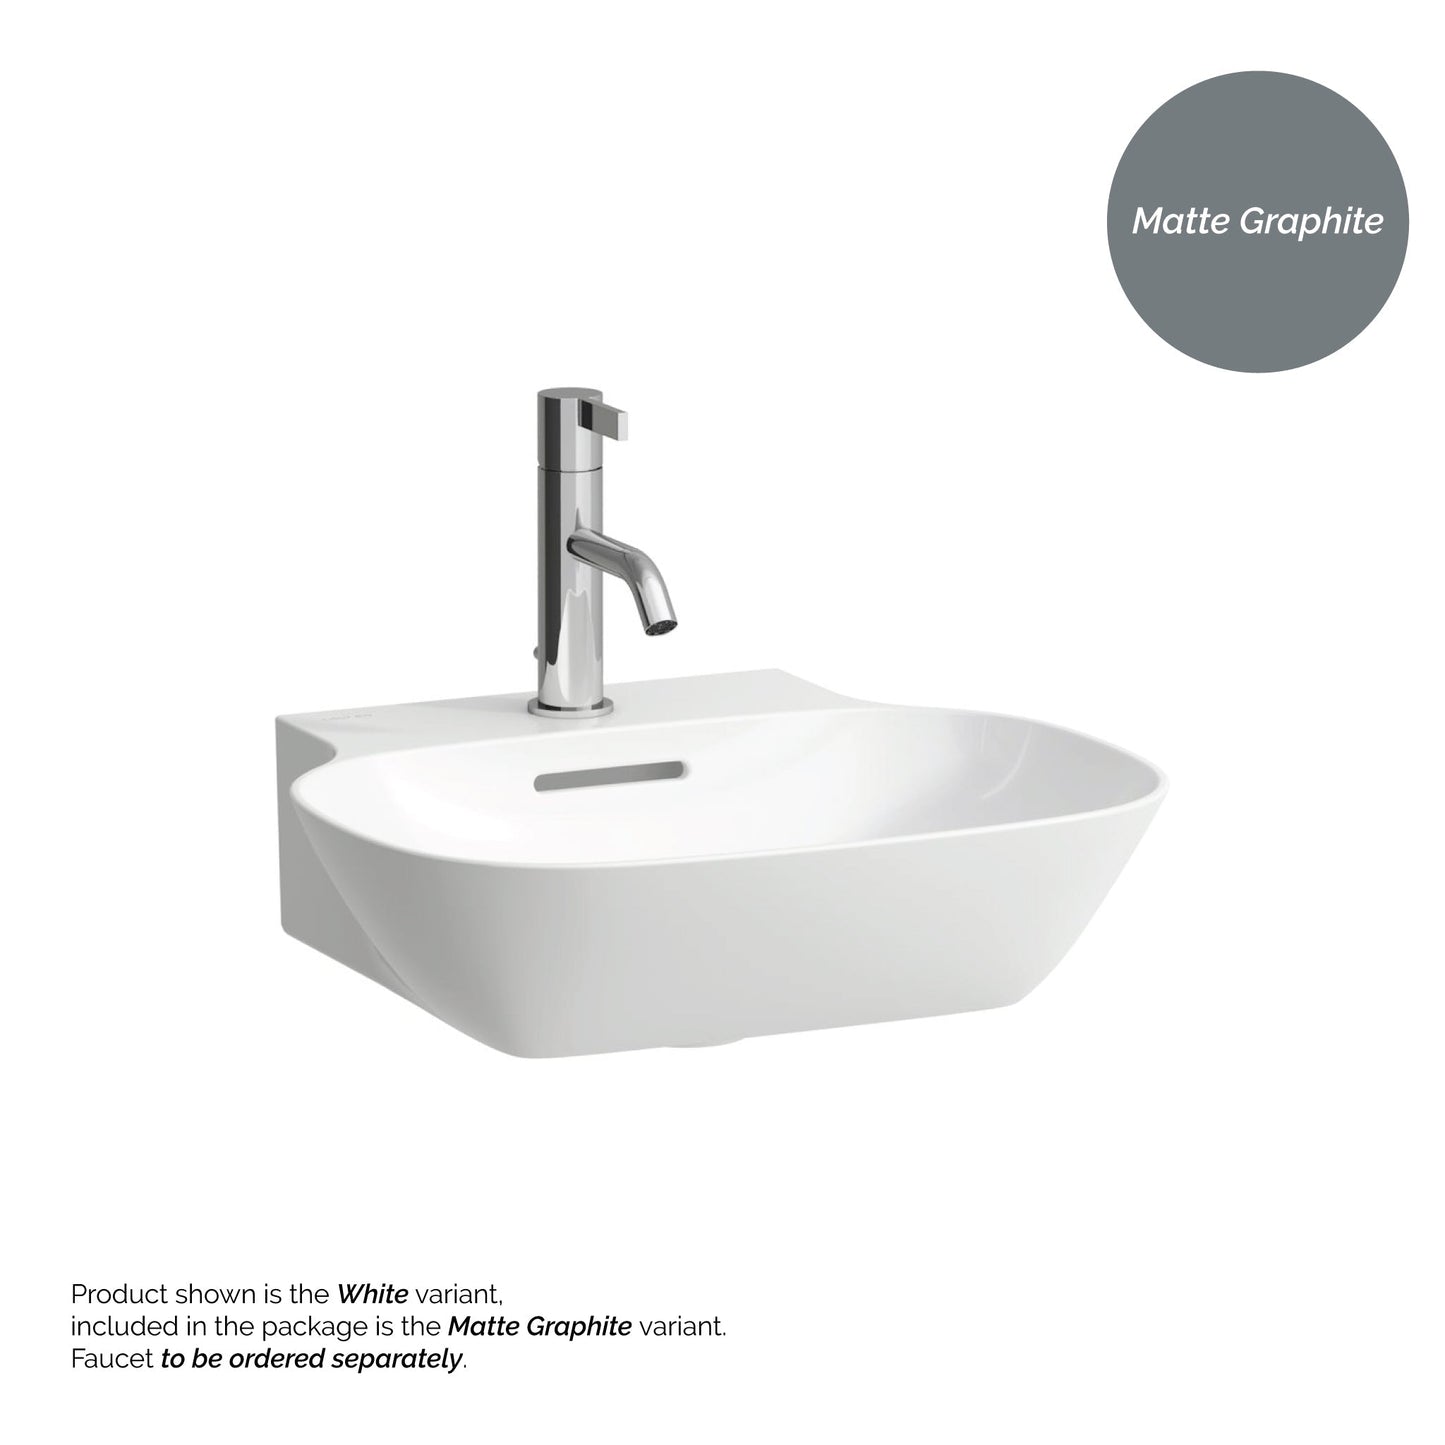 Laufen Ino 18" x 16" Rectangular Matte Graphite Wall-Mounted Bathroom Sink With Faucet Hole